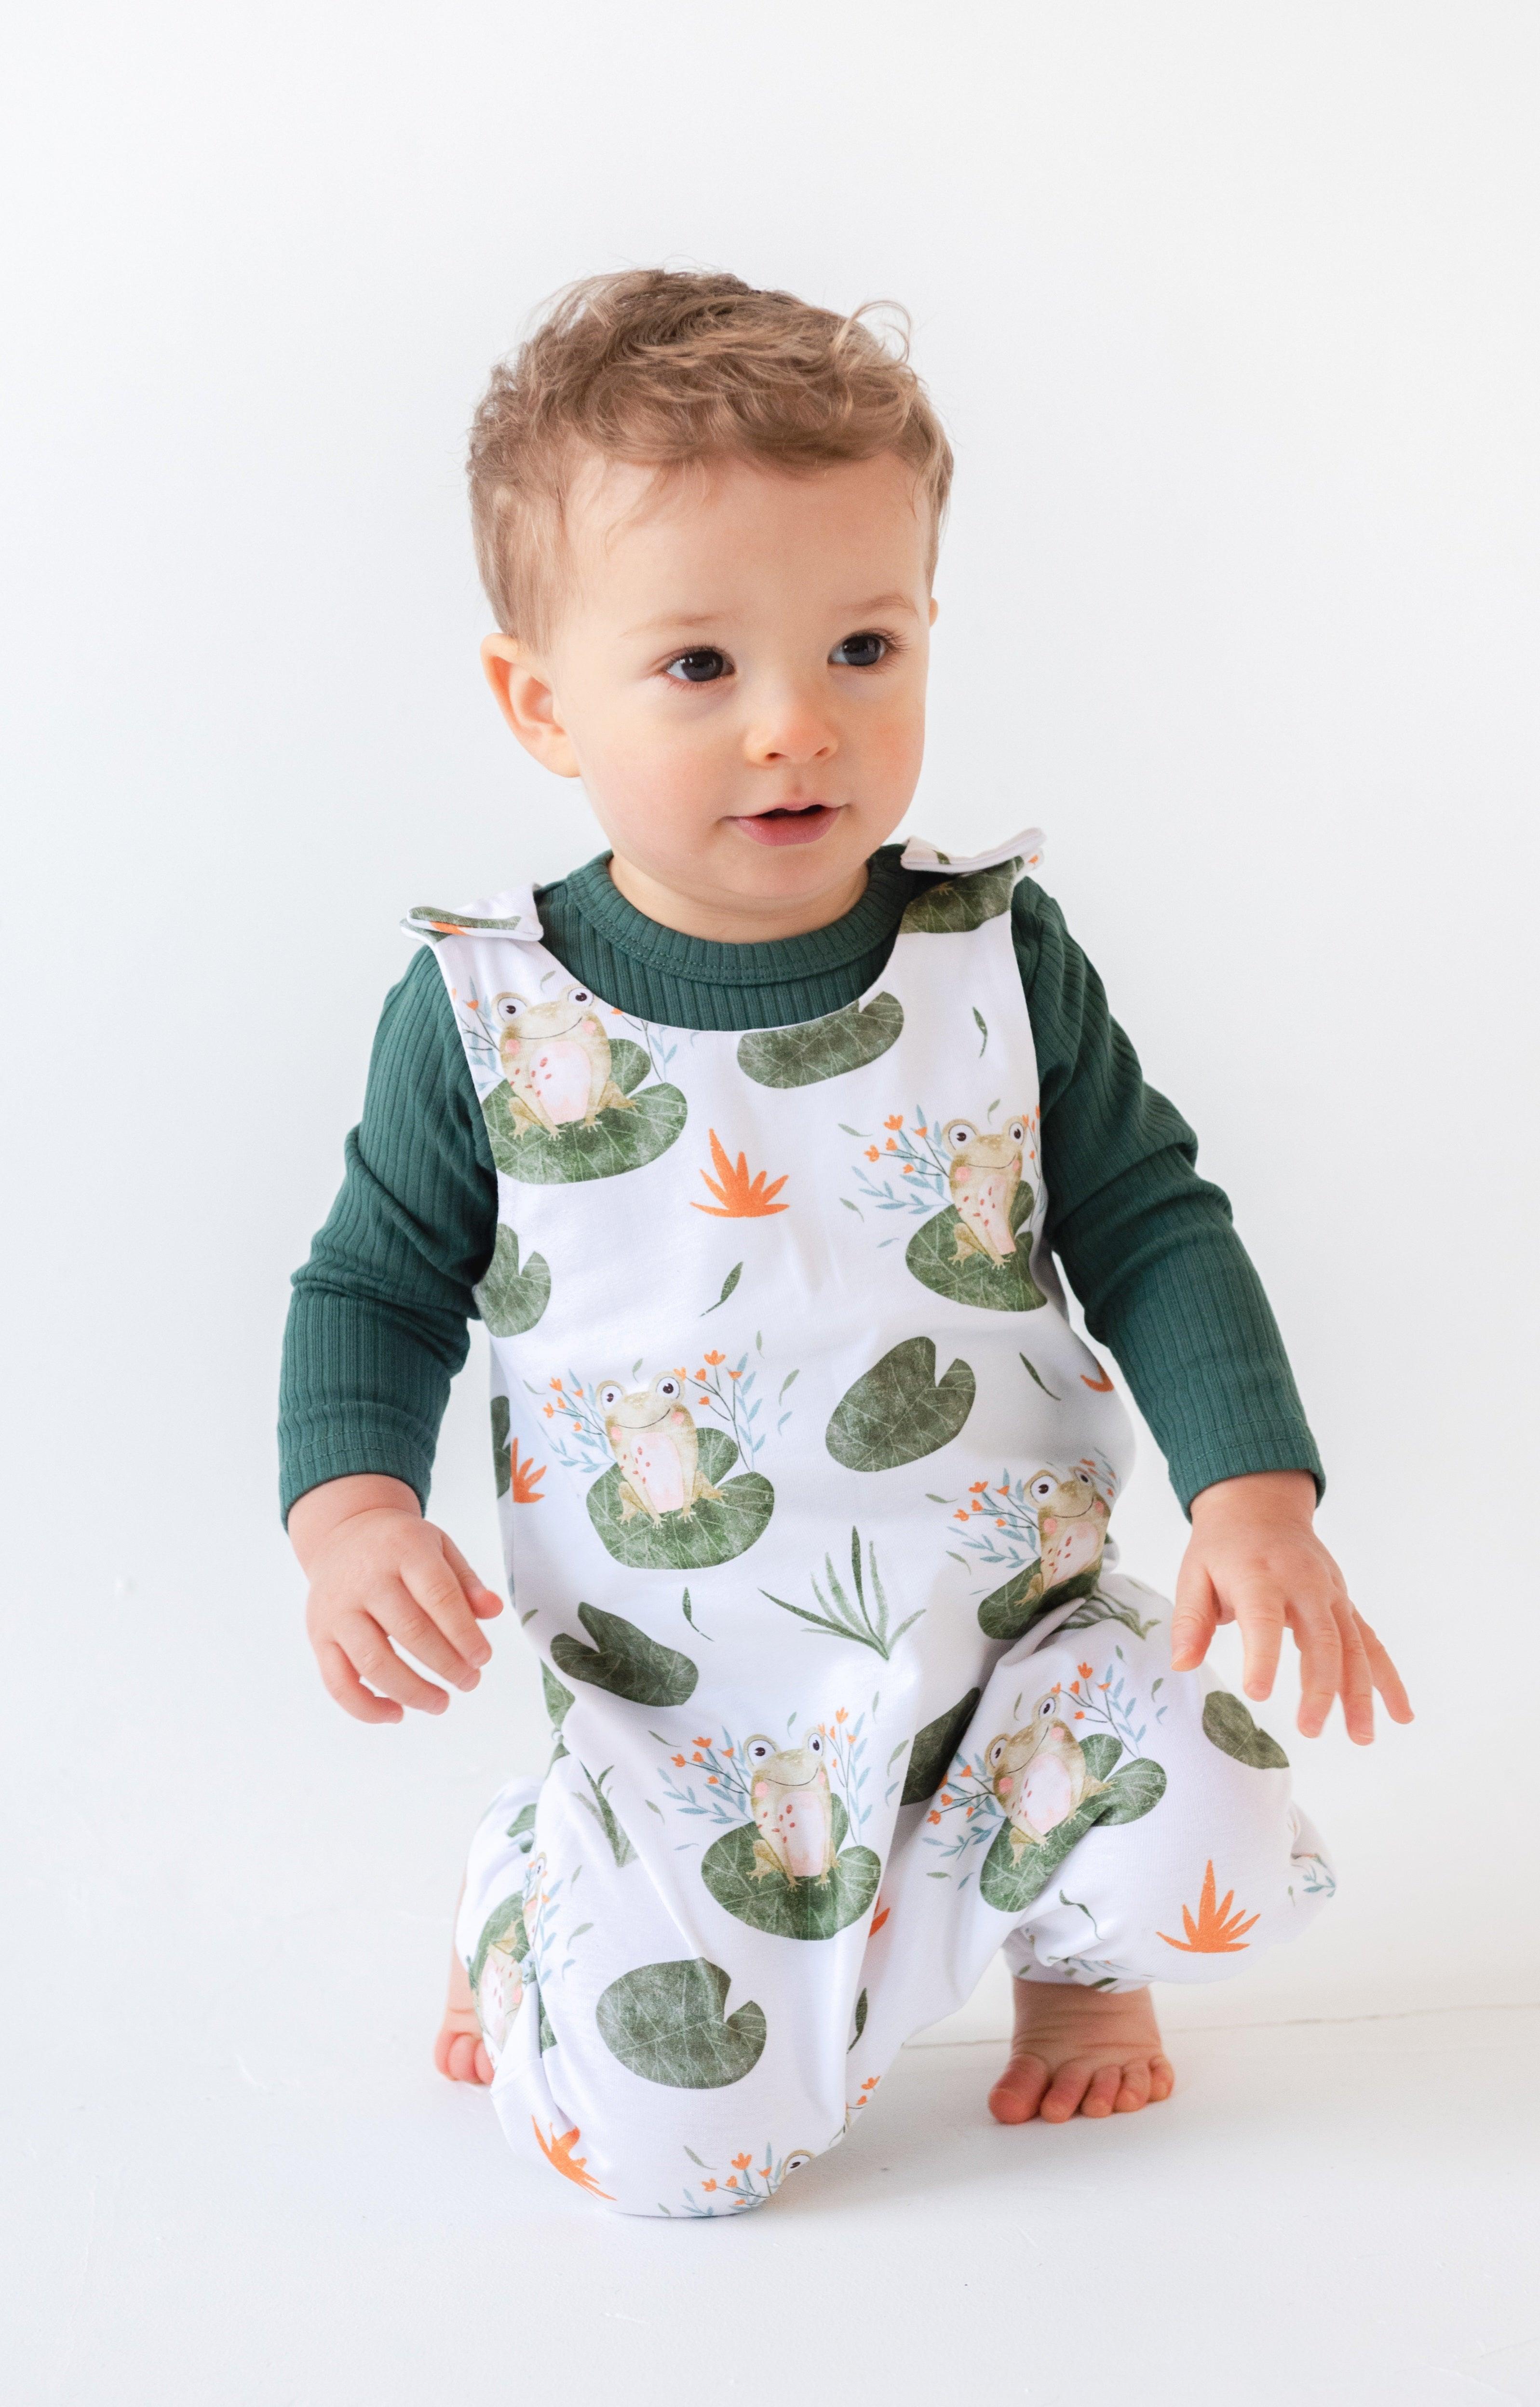 files/lily-pad-frog-dungaree-romper-claybearofficial-1.jpg